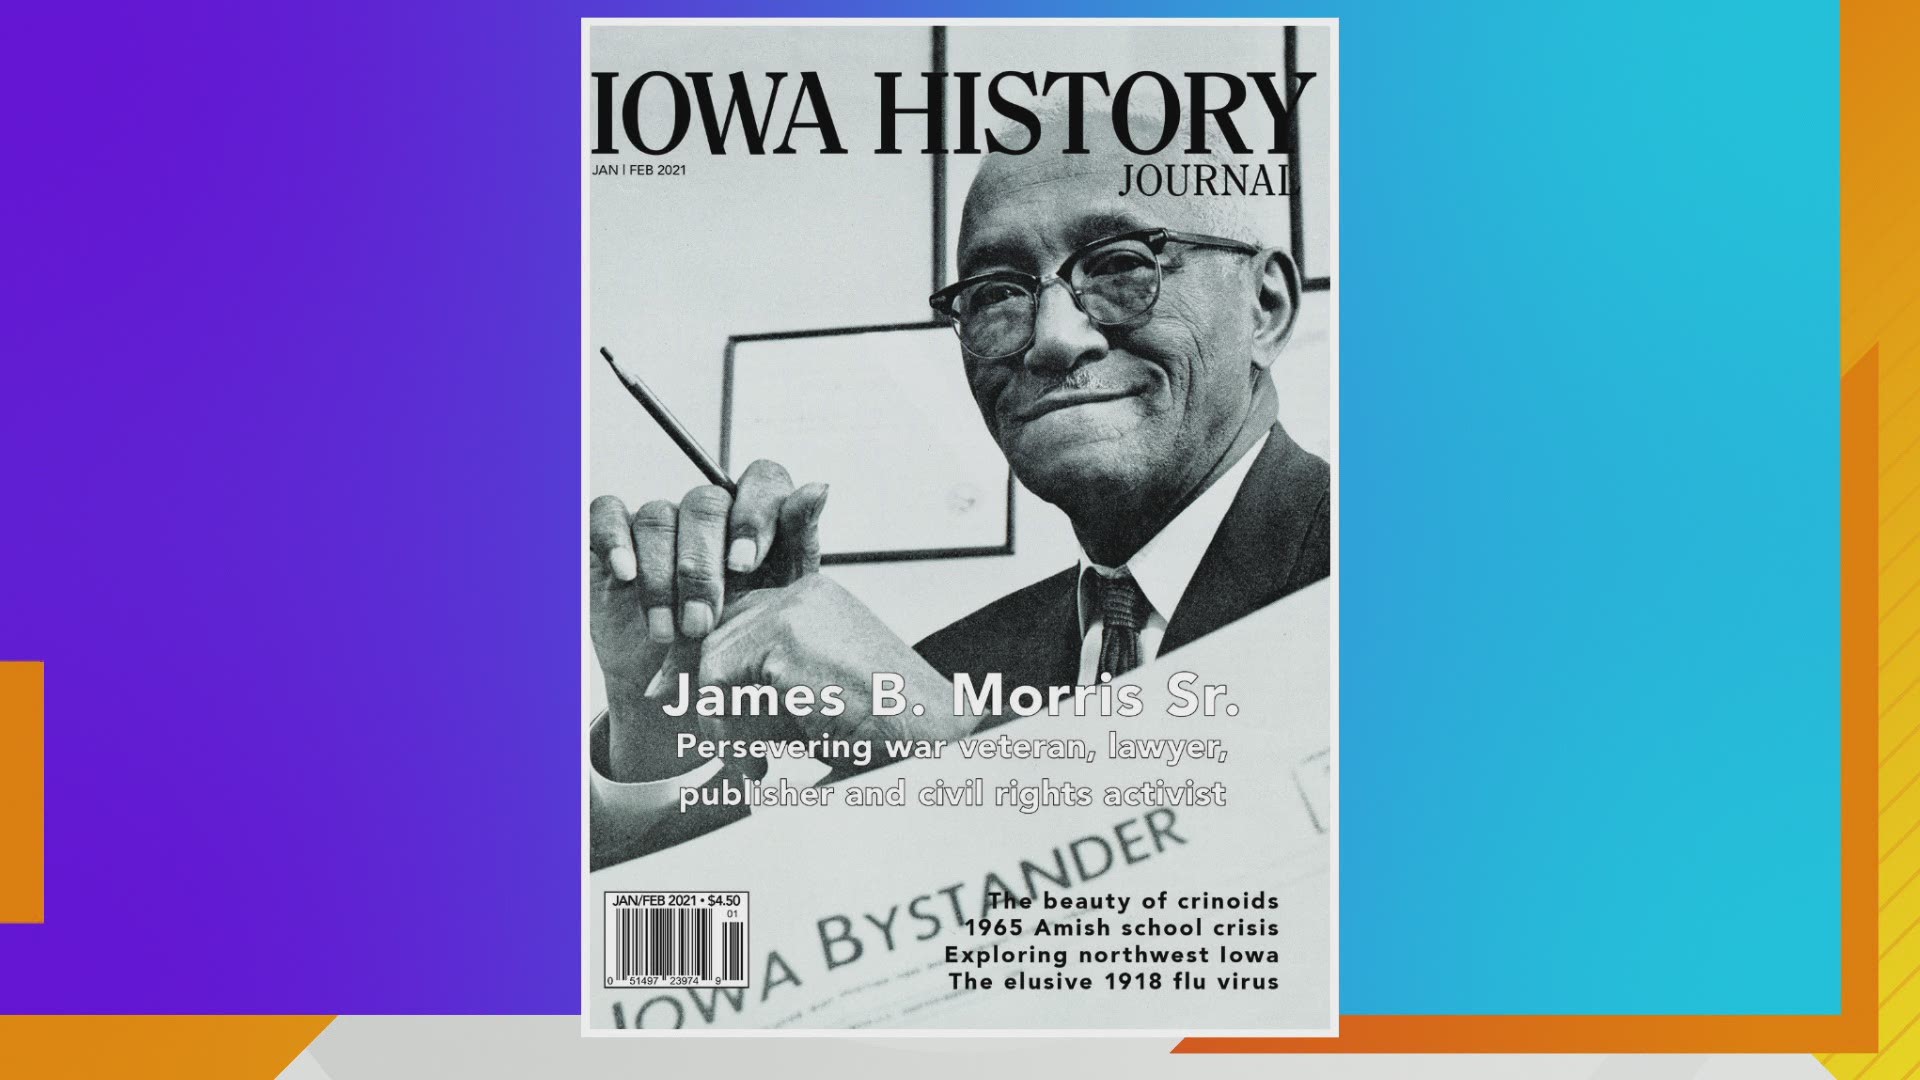 Lou talks with Michael Swanger about the latest issue of Iowa History Journal